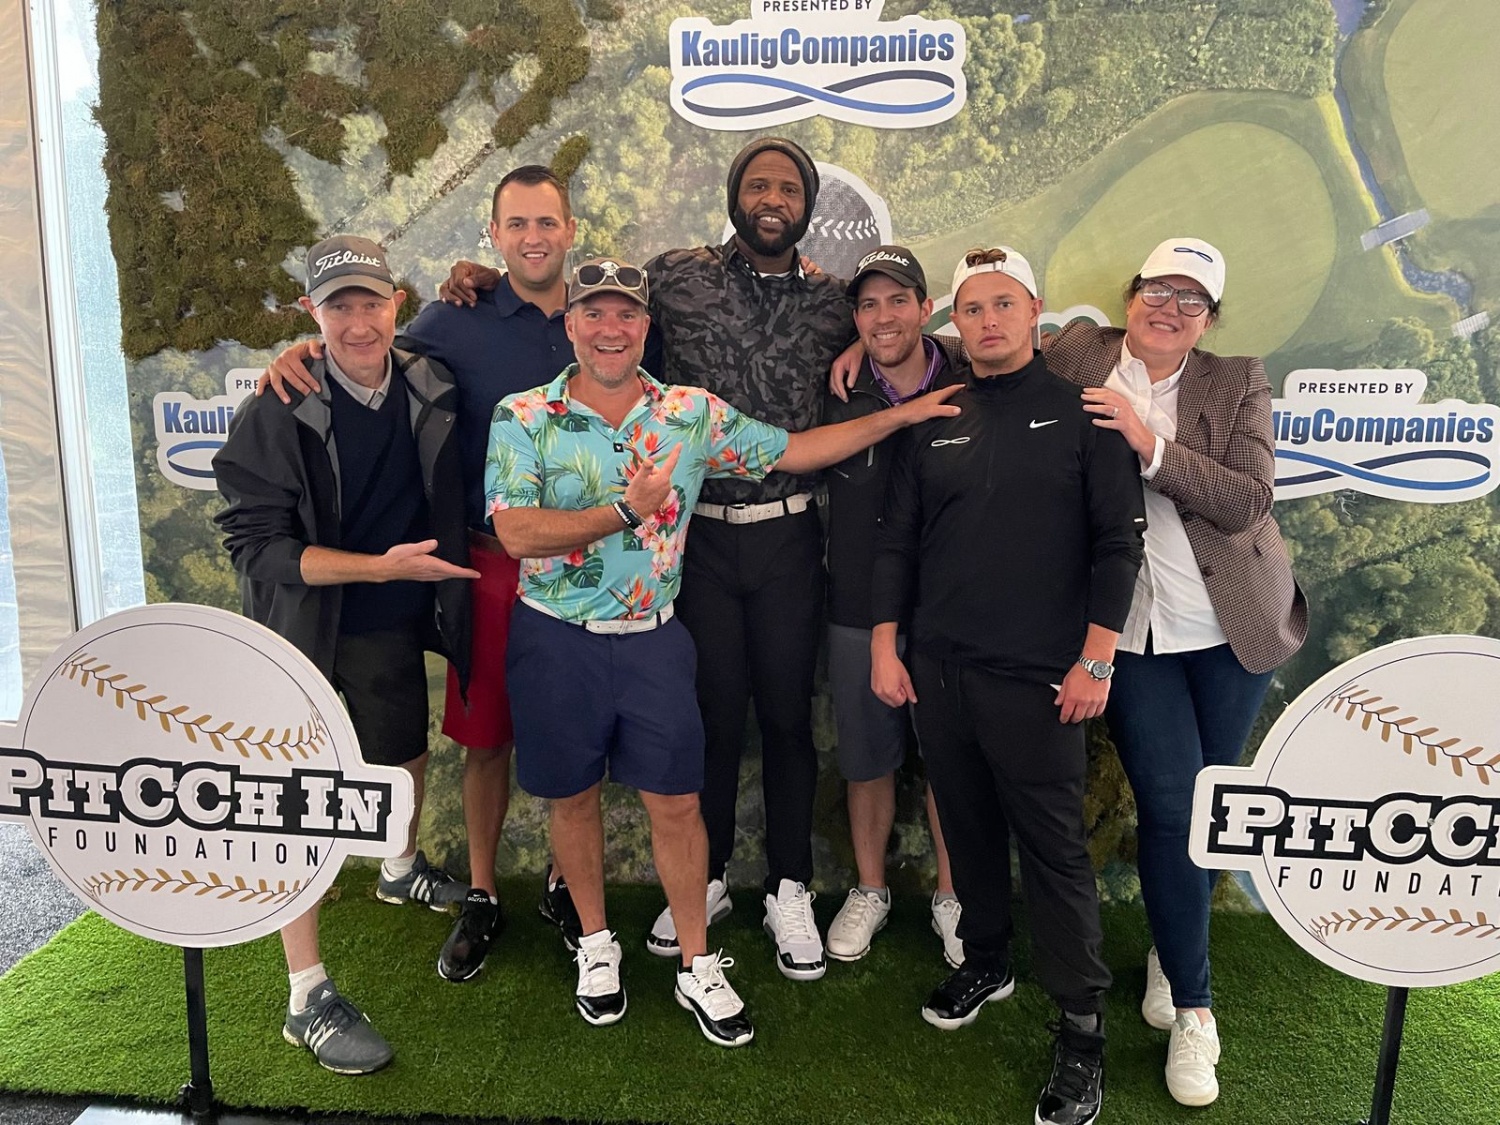 C.C. and Amber Sabathia host the first annual Pitcchin Foundation golf  outing